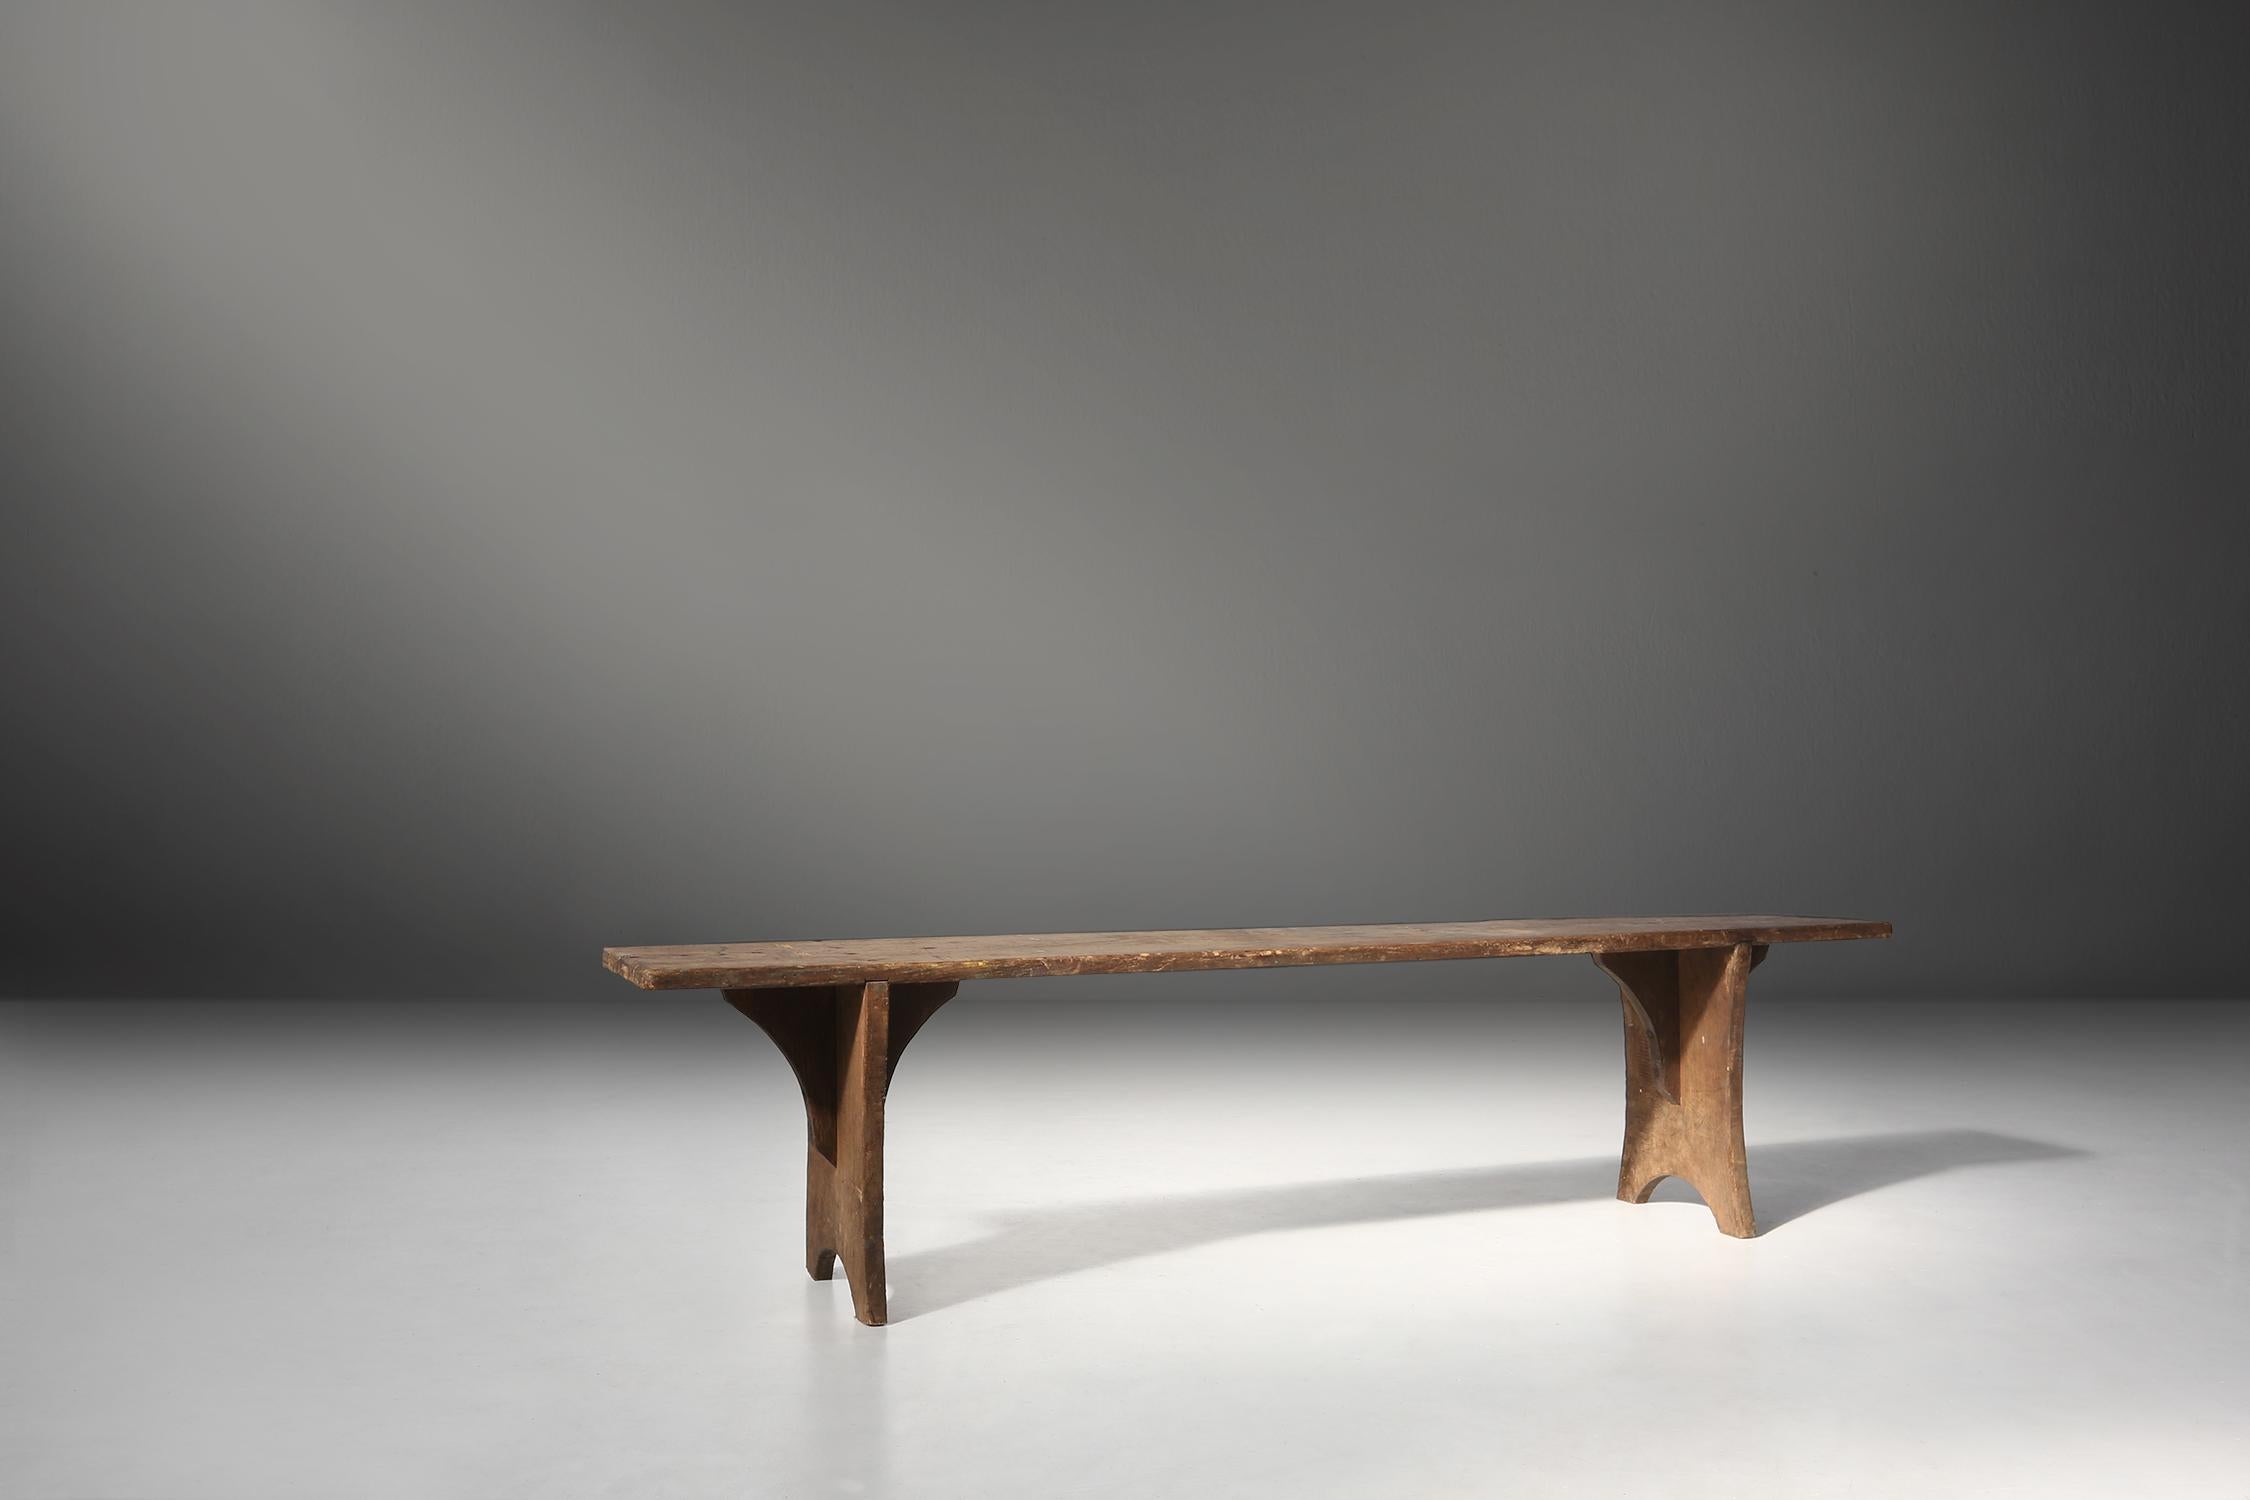 French Rustic wooden bench 1890